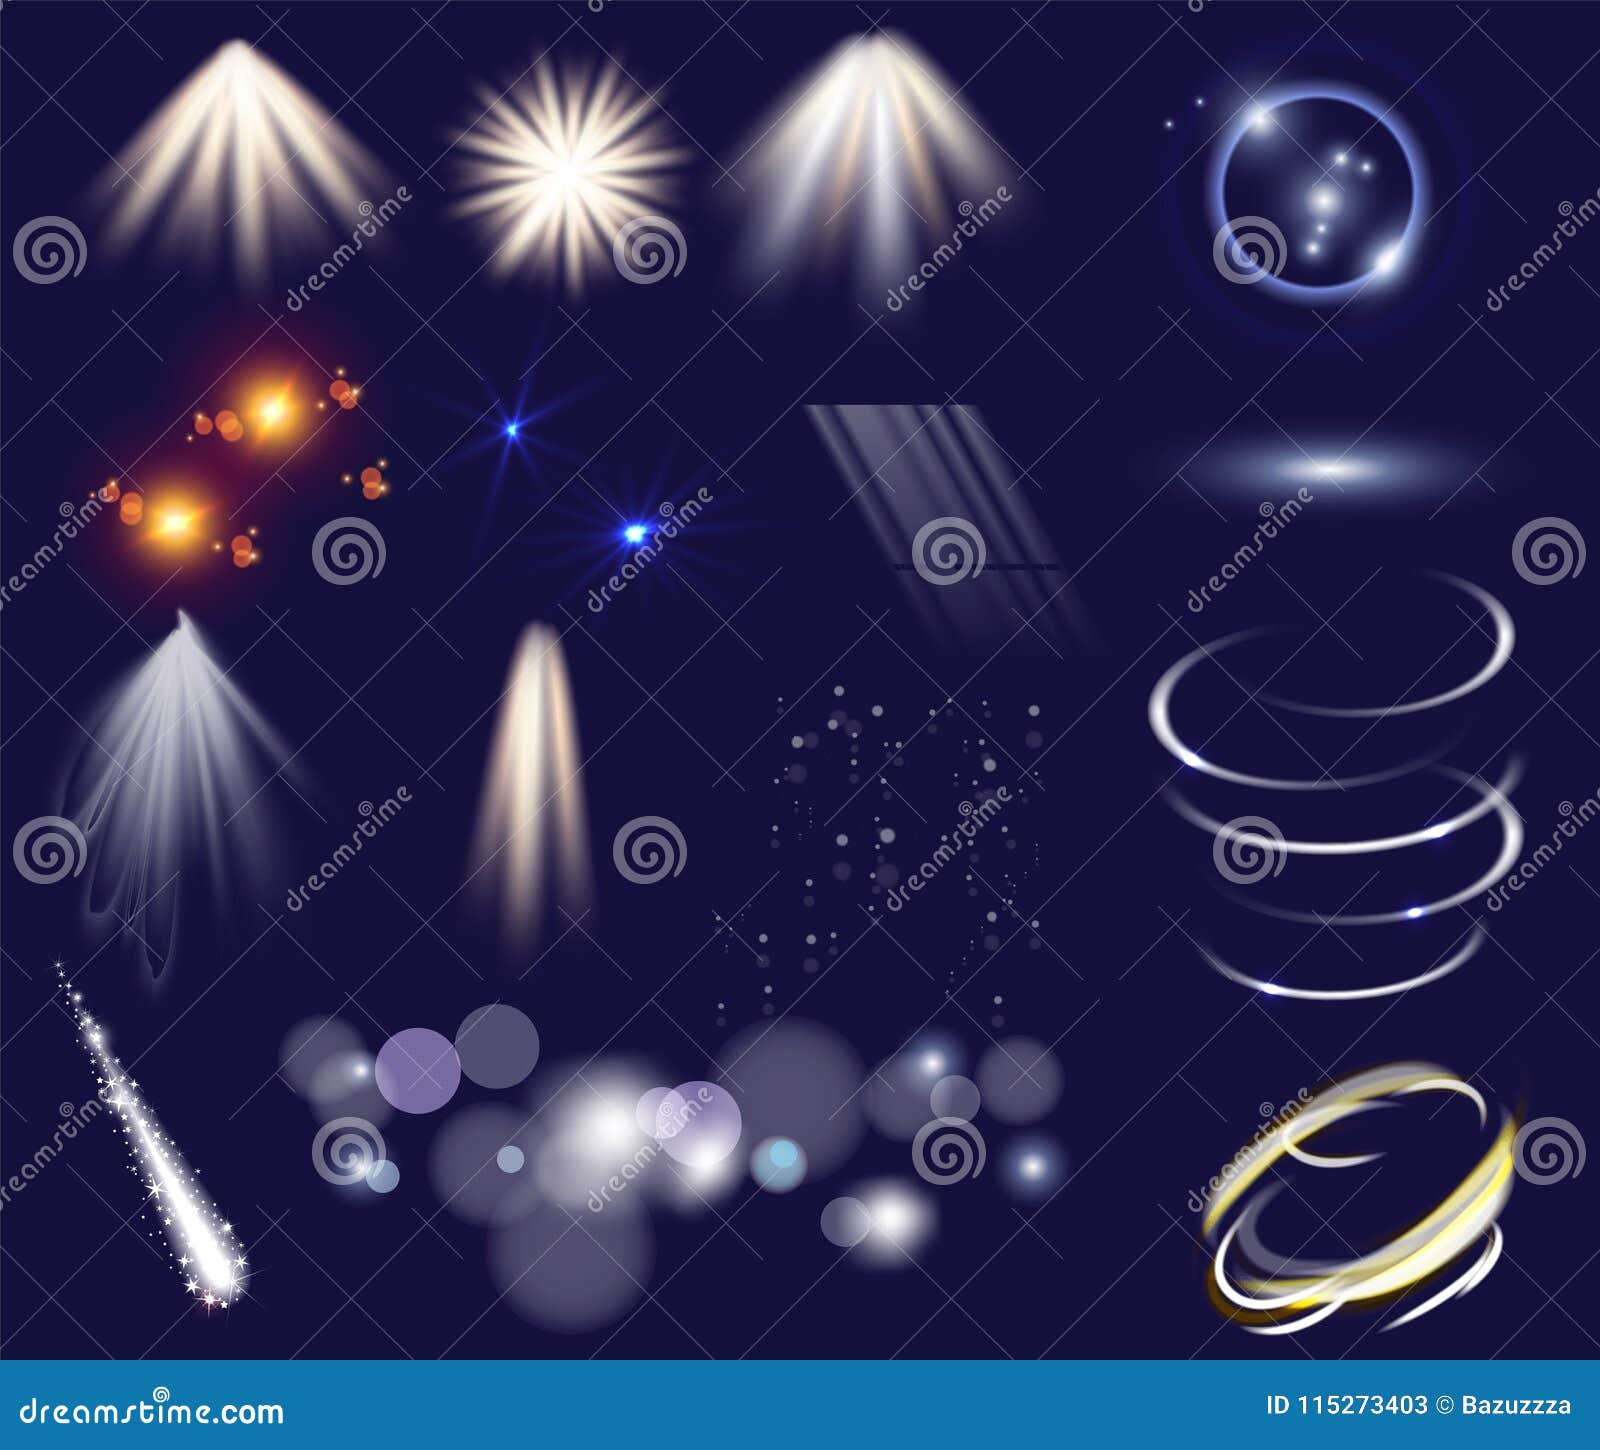  set of light effects.  clip art template objects. glow light stars bursts with sparkles. magic glitter